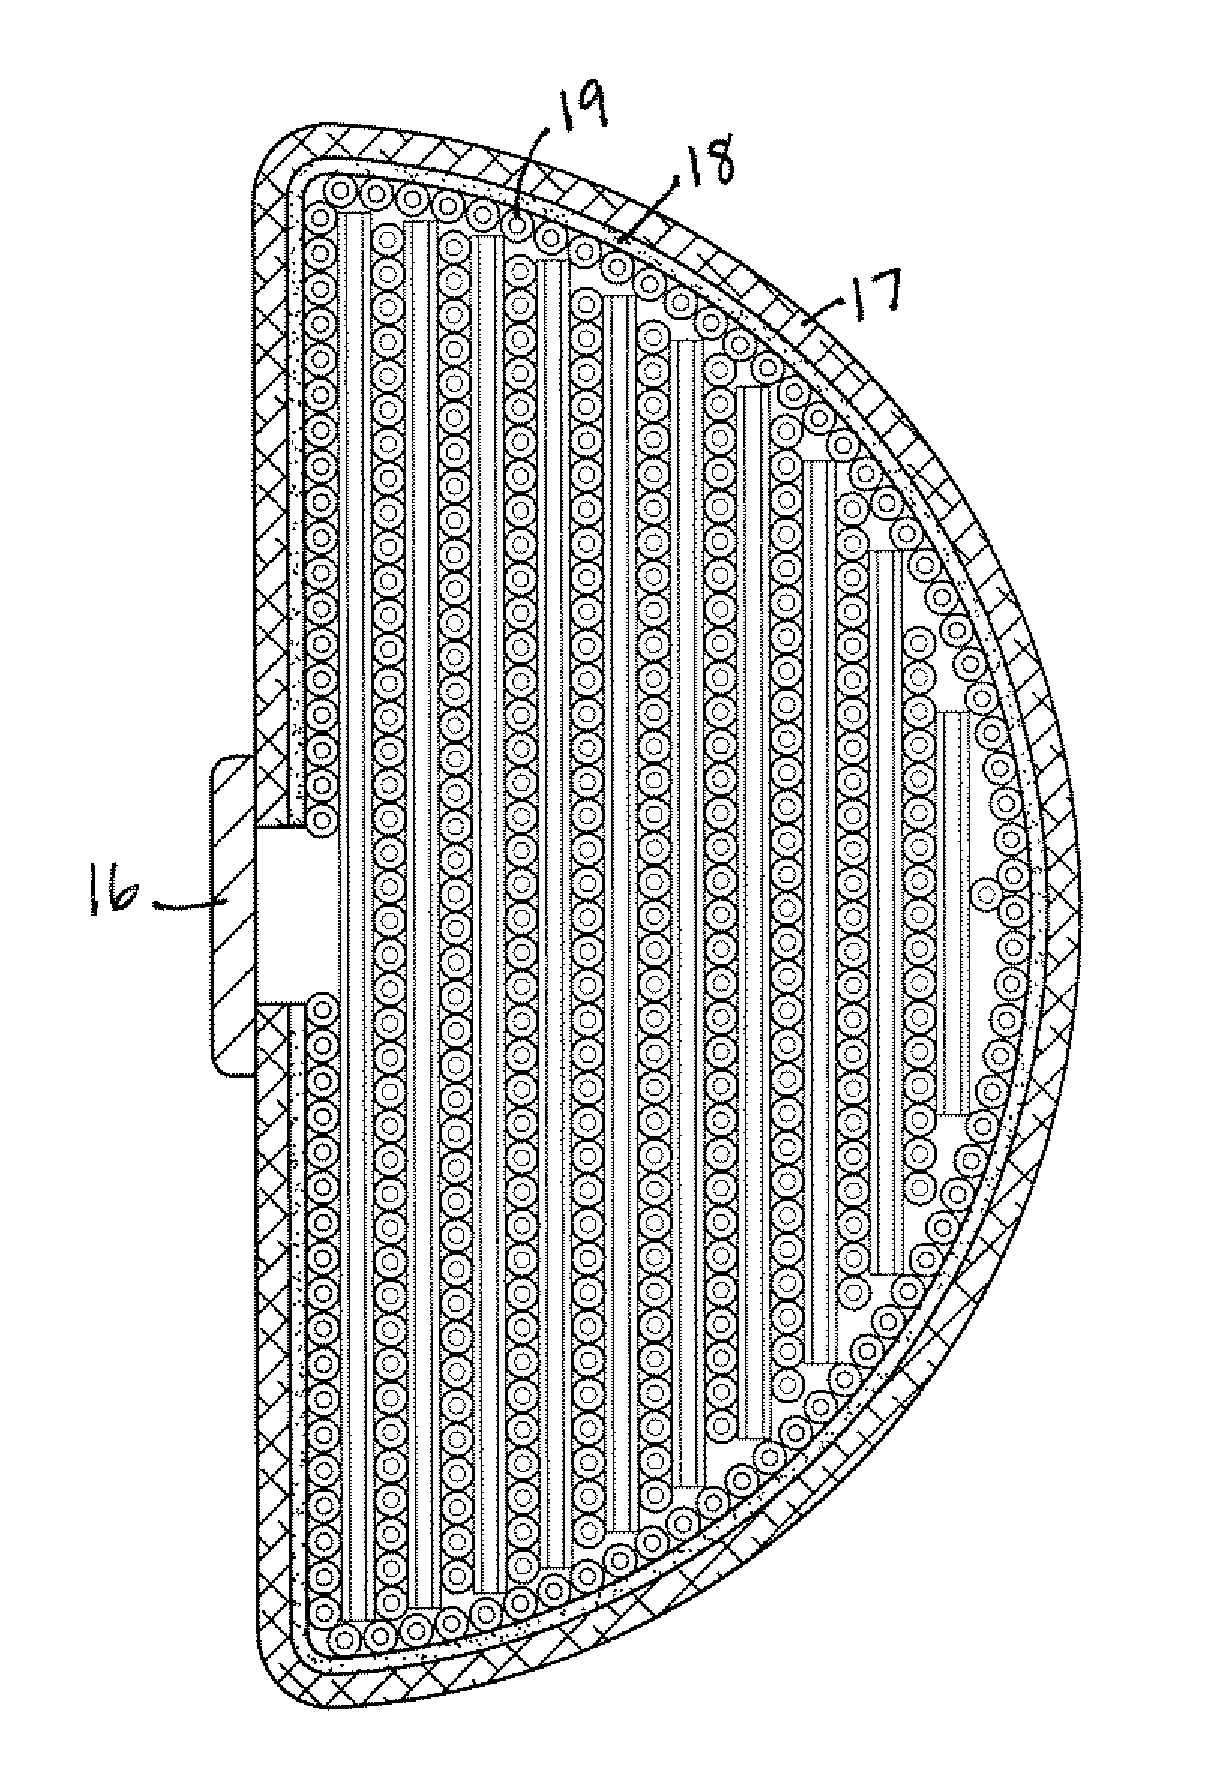 Breast Implants and Methods of Manufacture